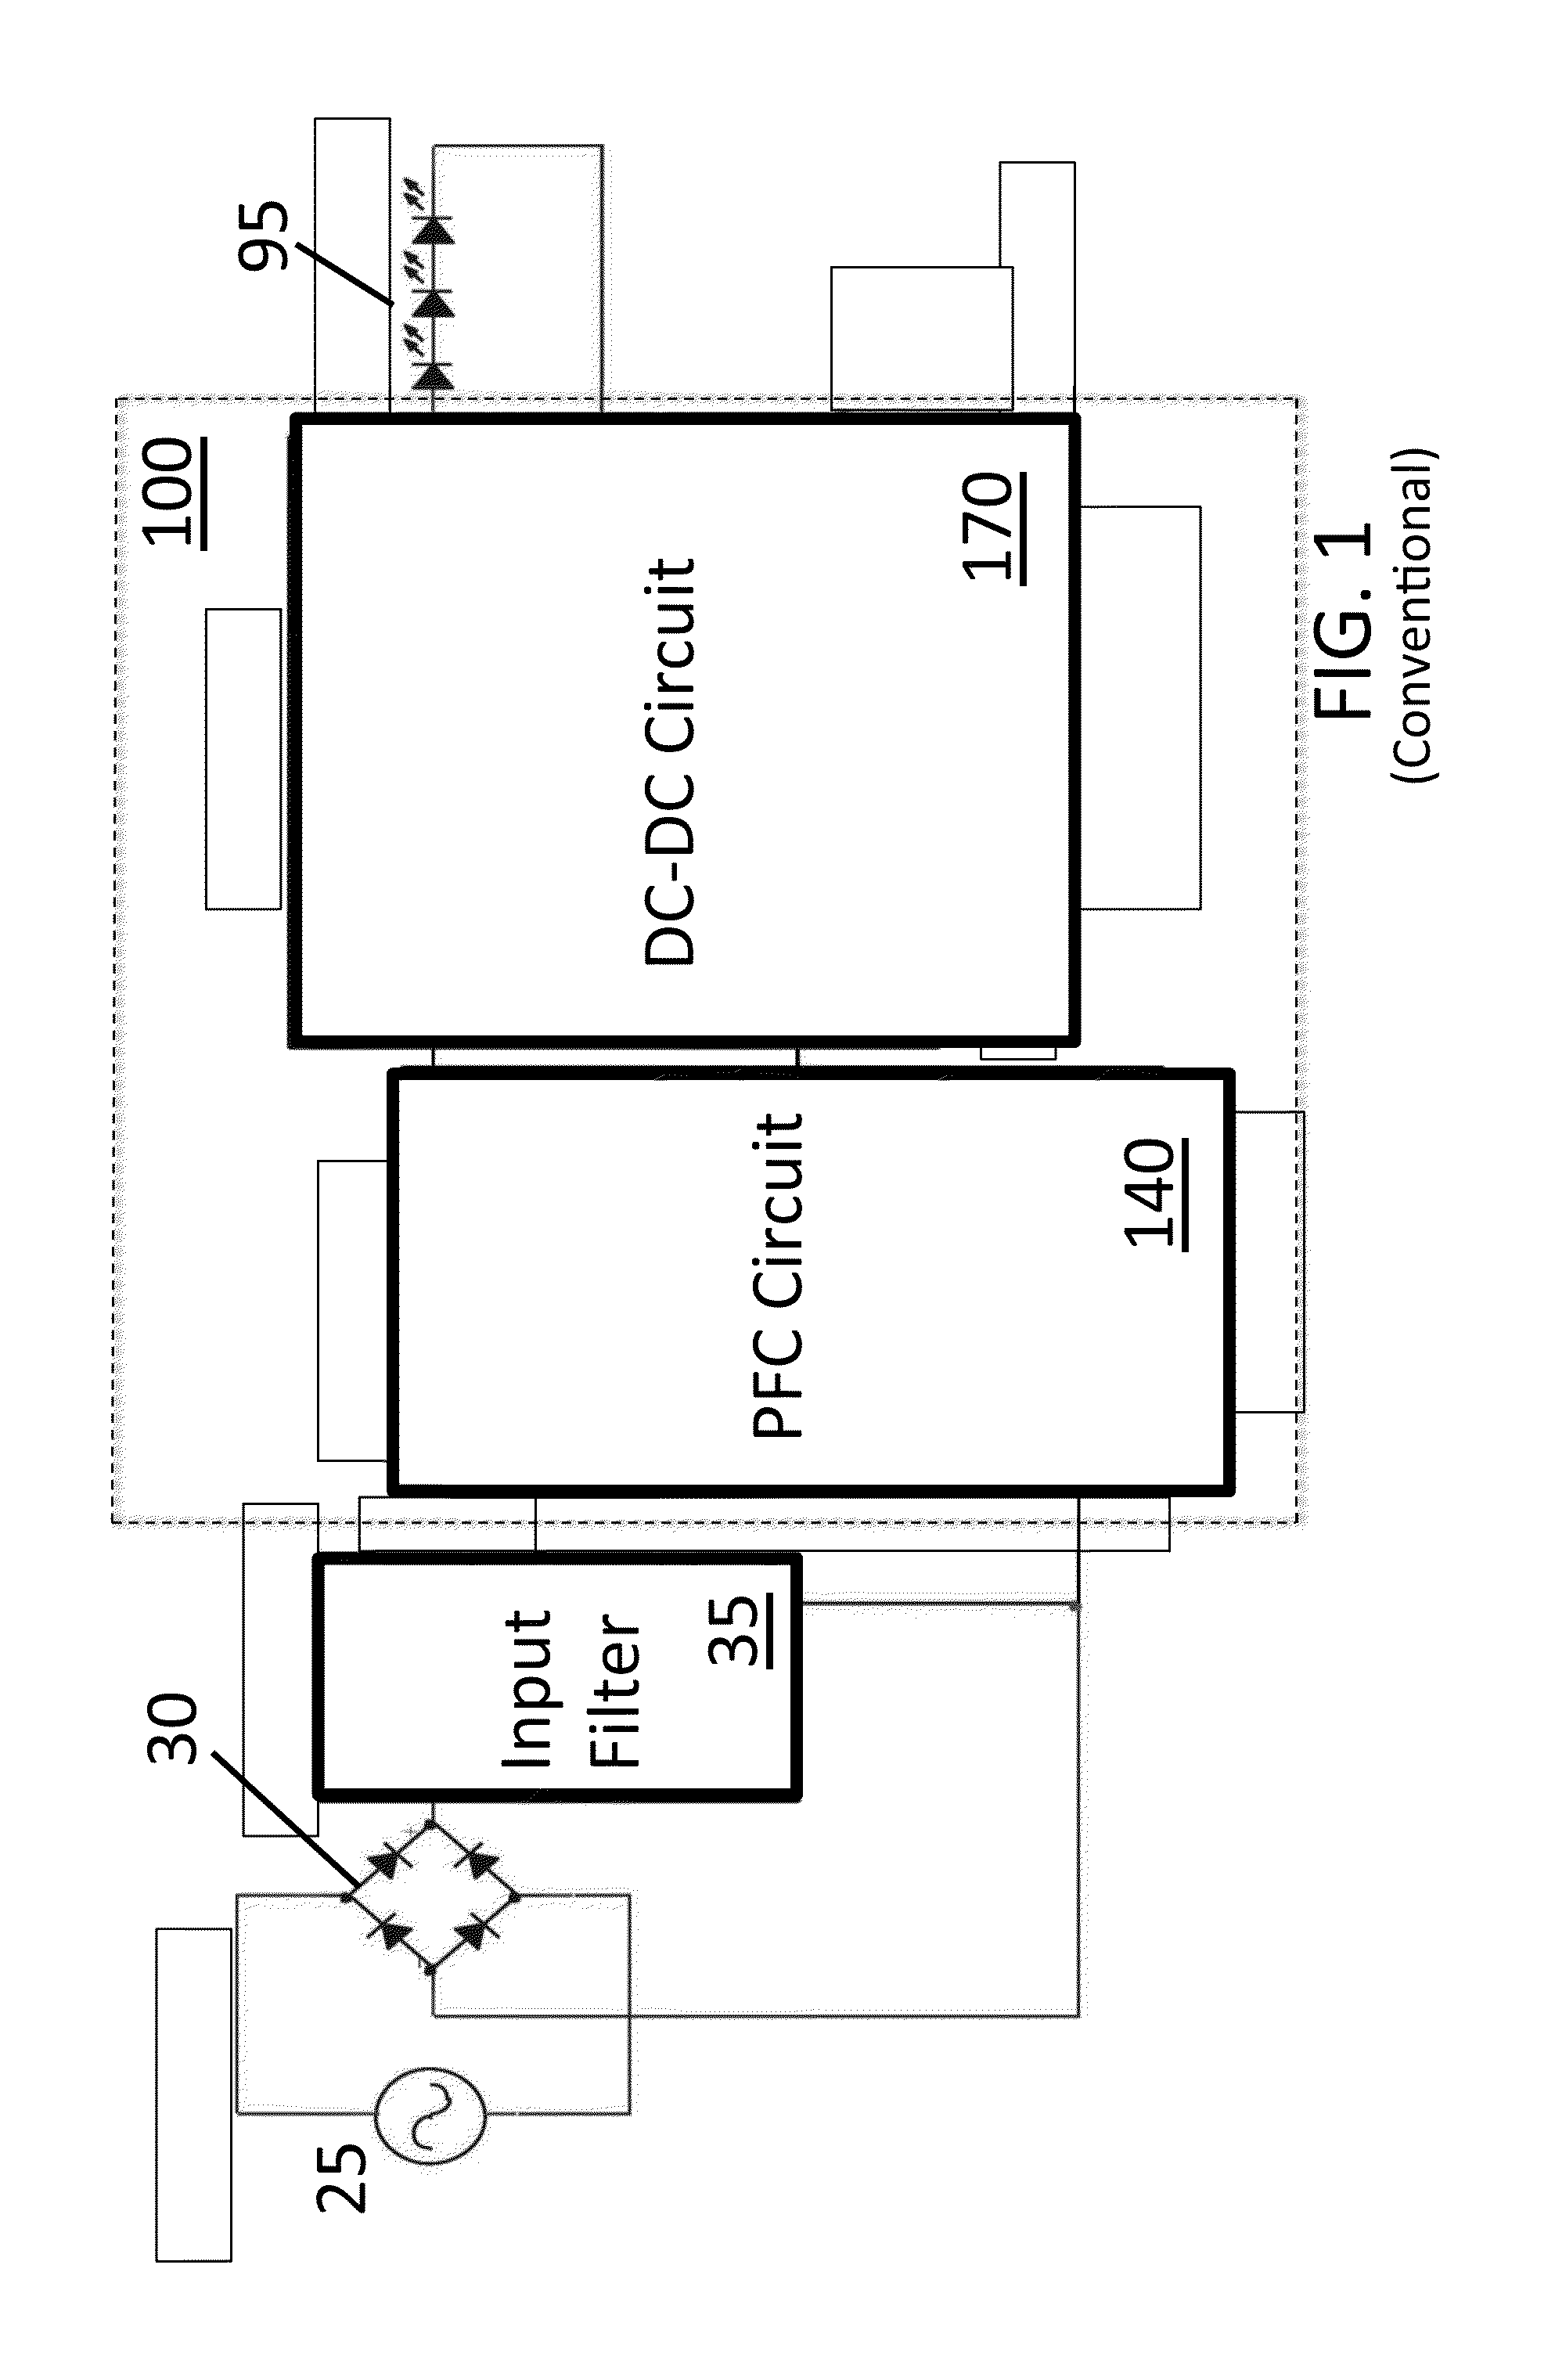 Single-stage ac-dc power converter with flyback pfc and improved thd